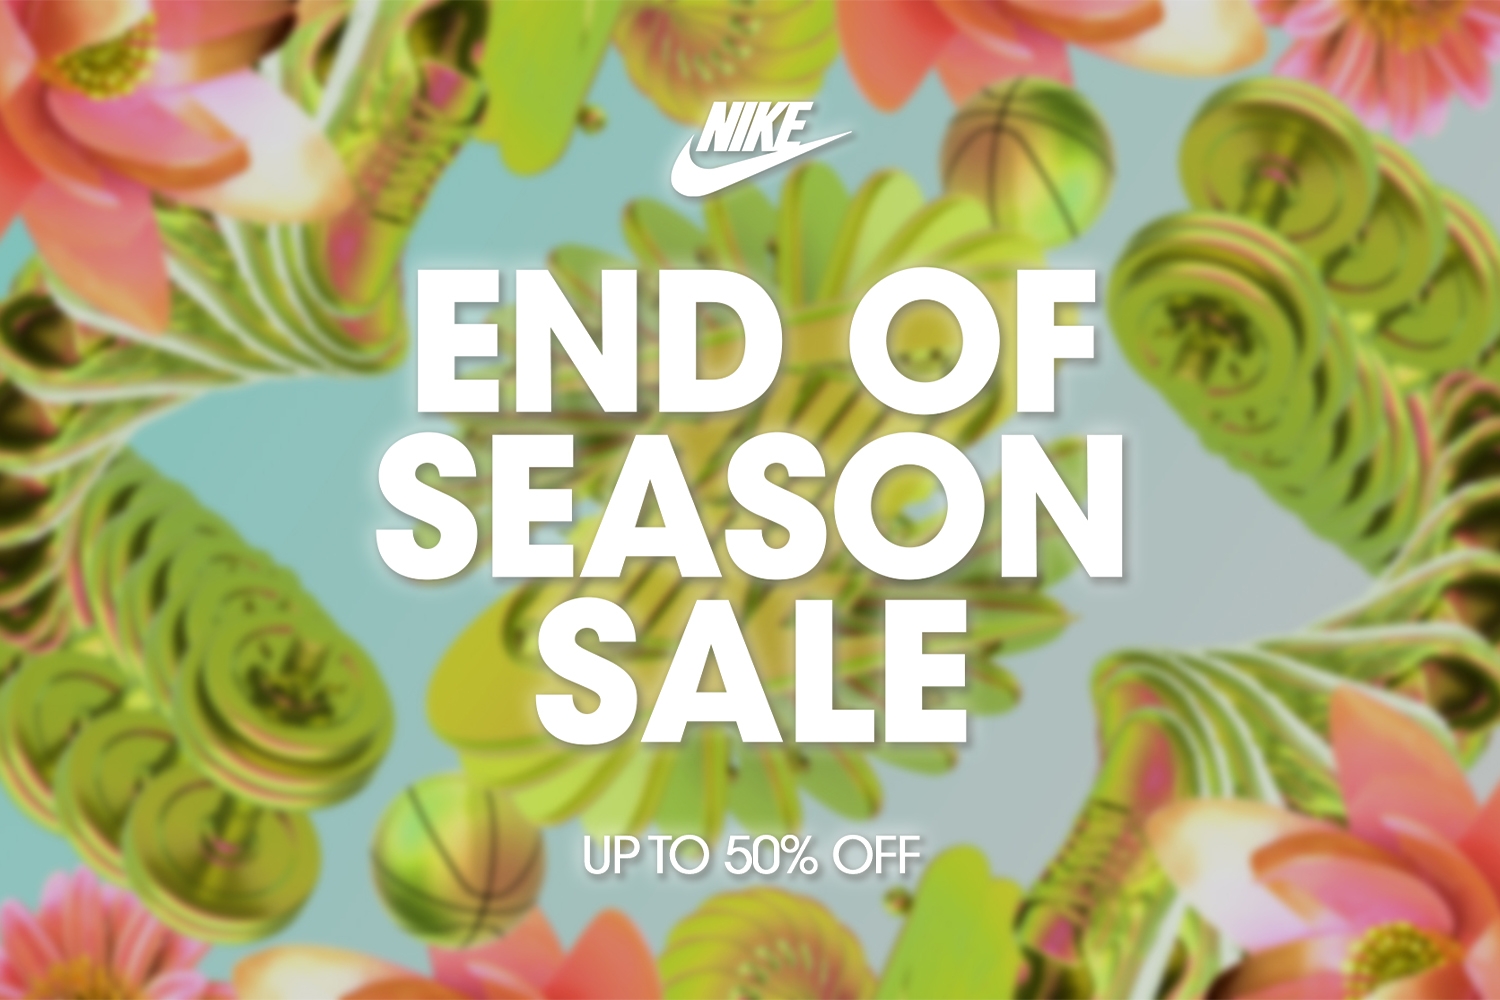 The Nike End of Season Sale is now live